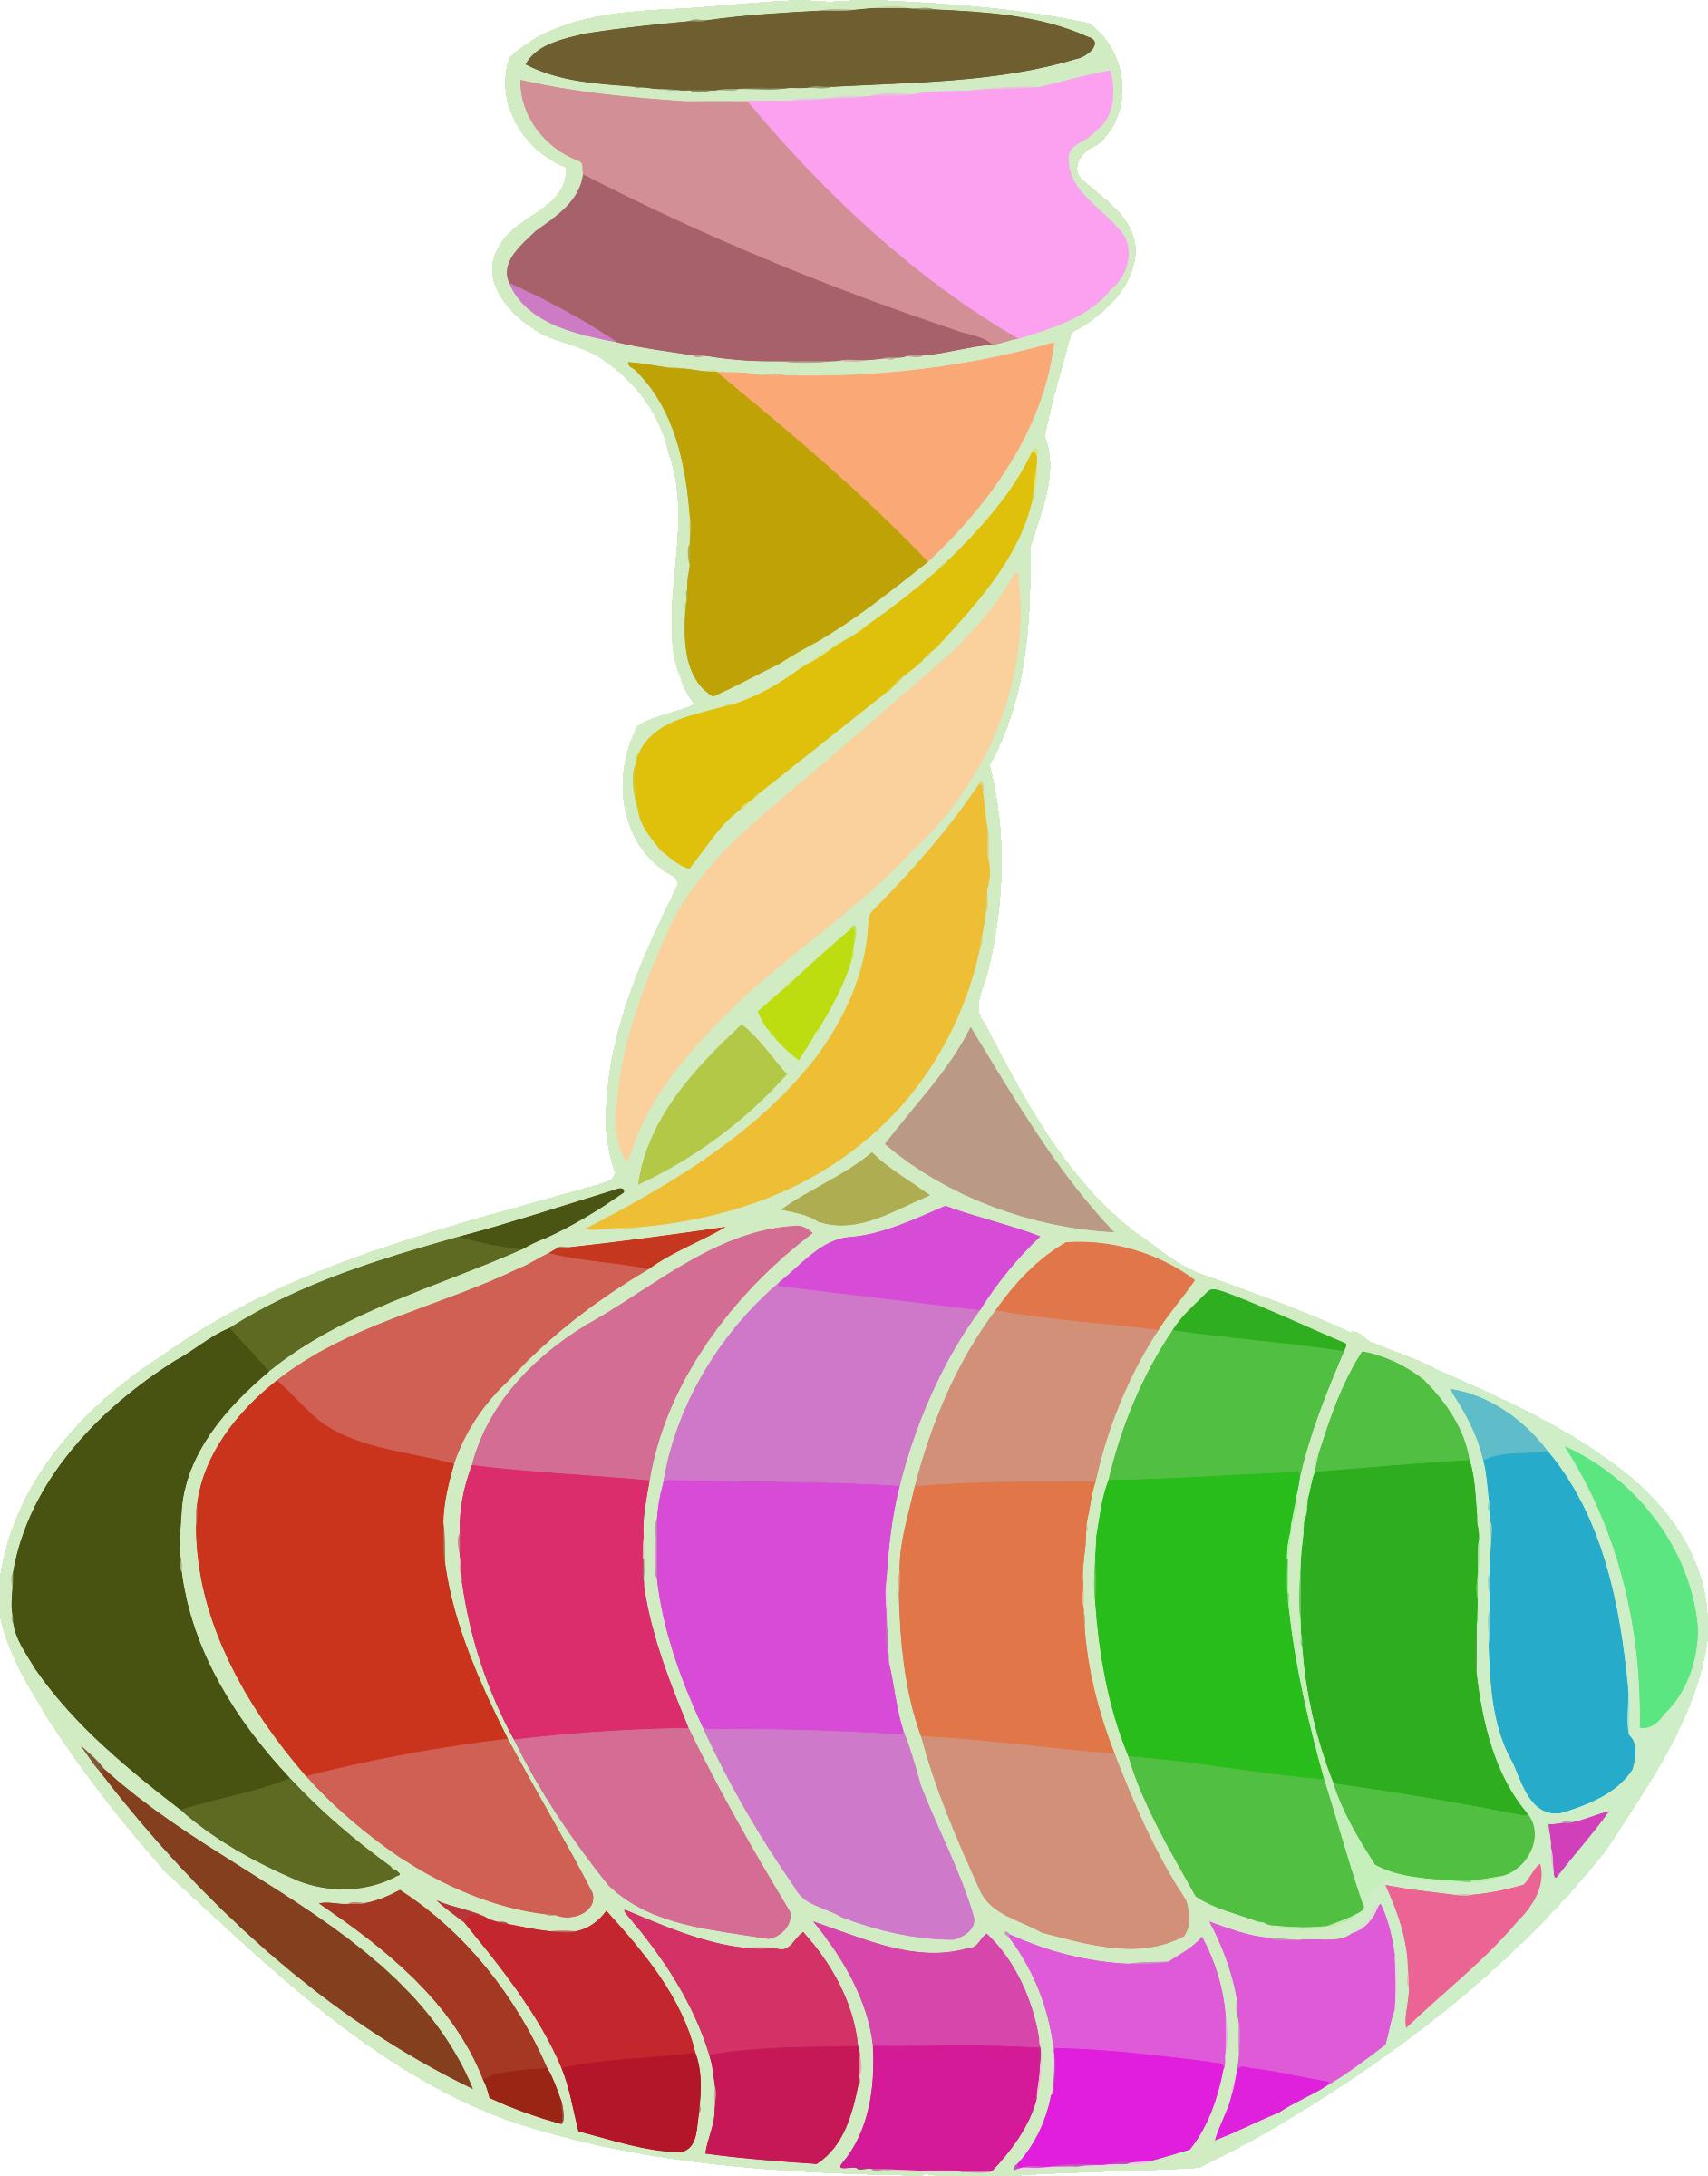 Colorful vase icons